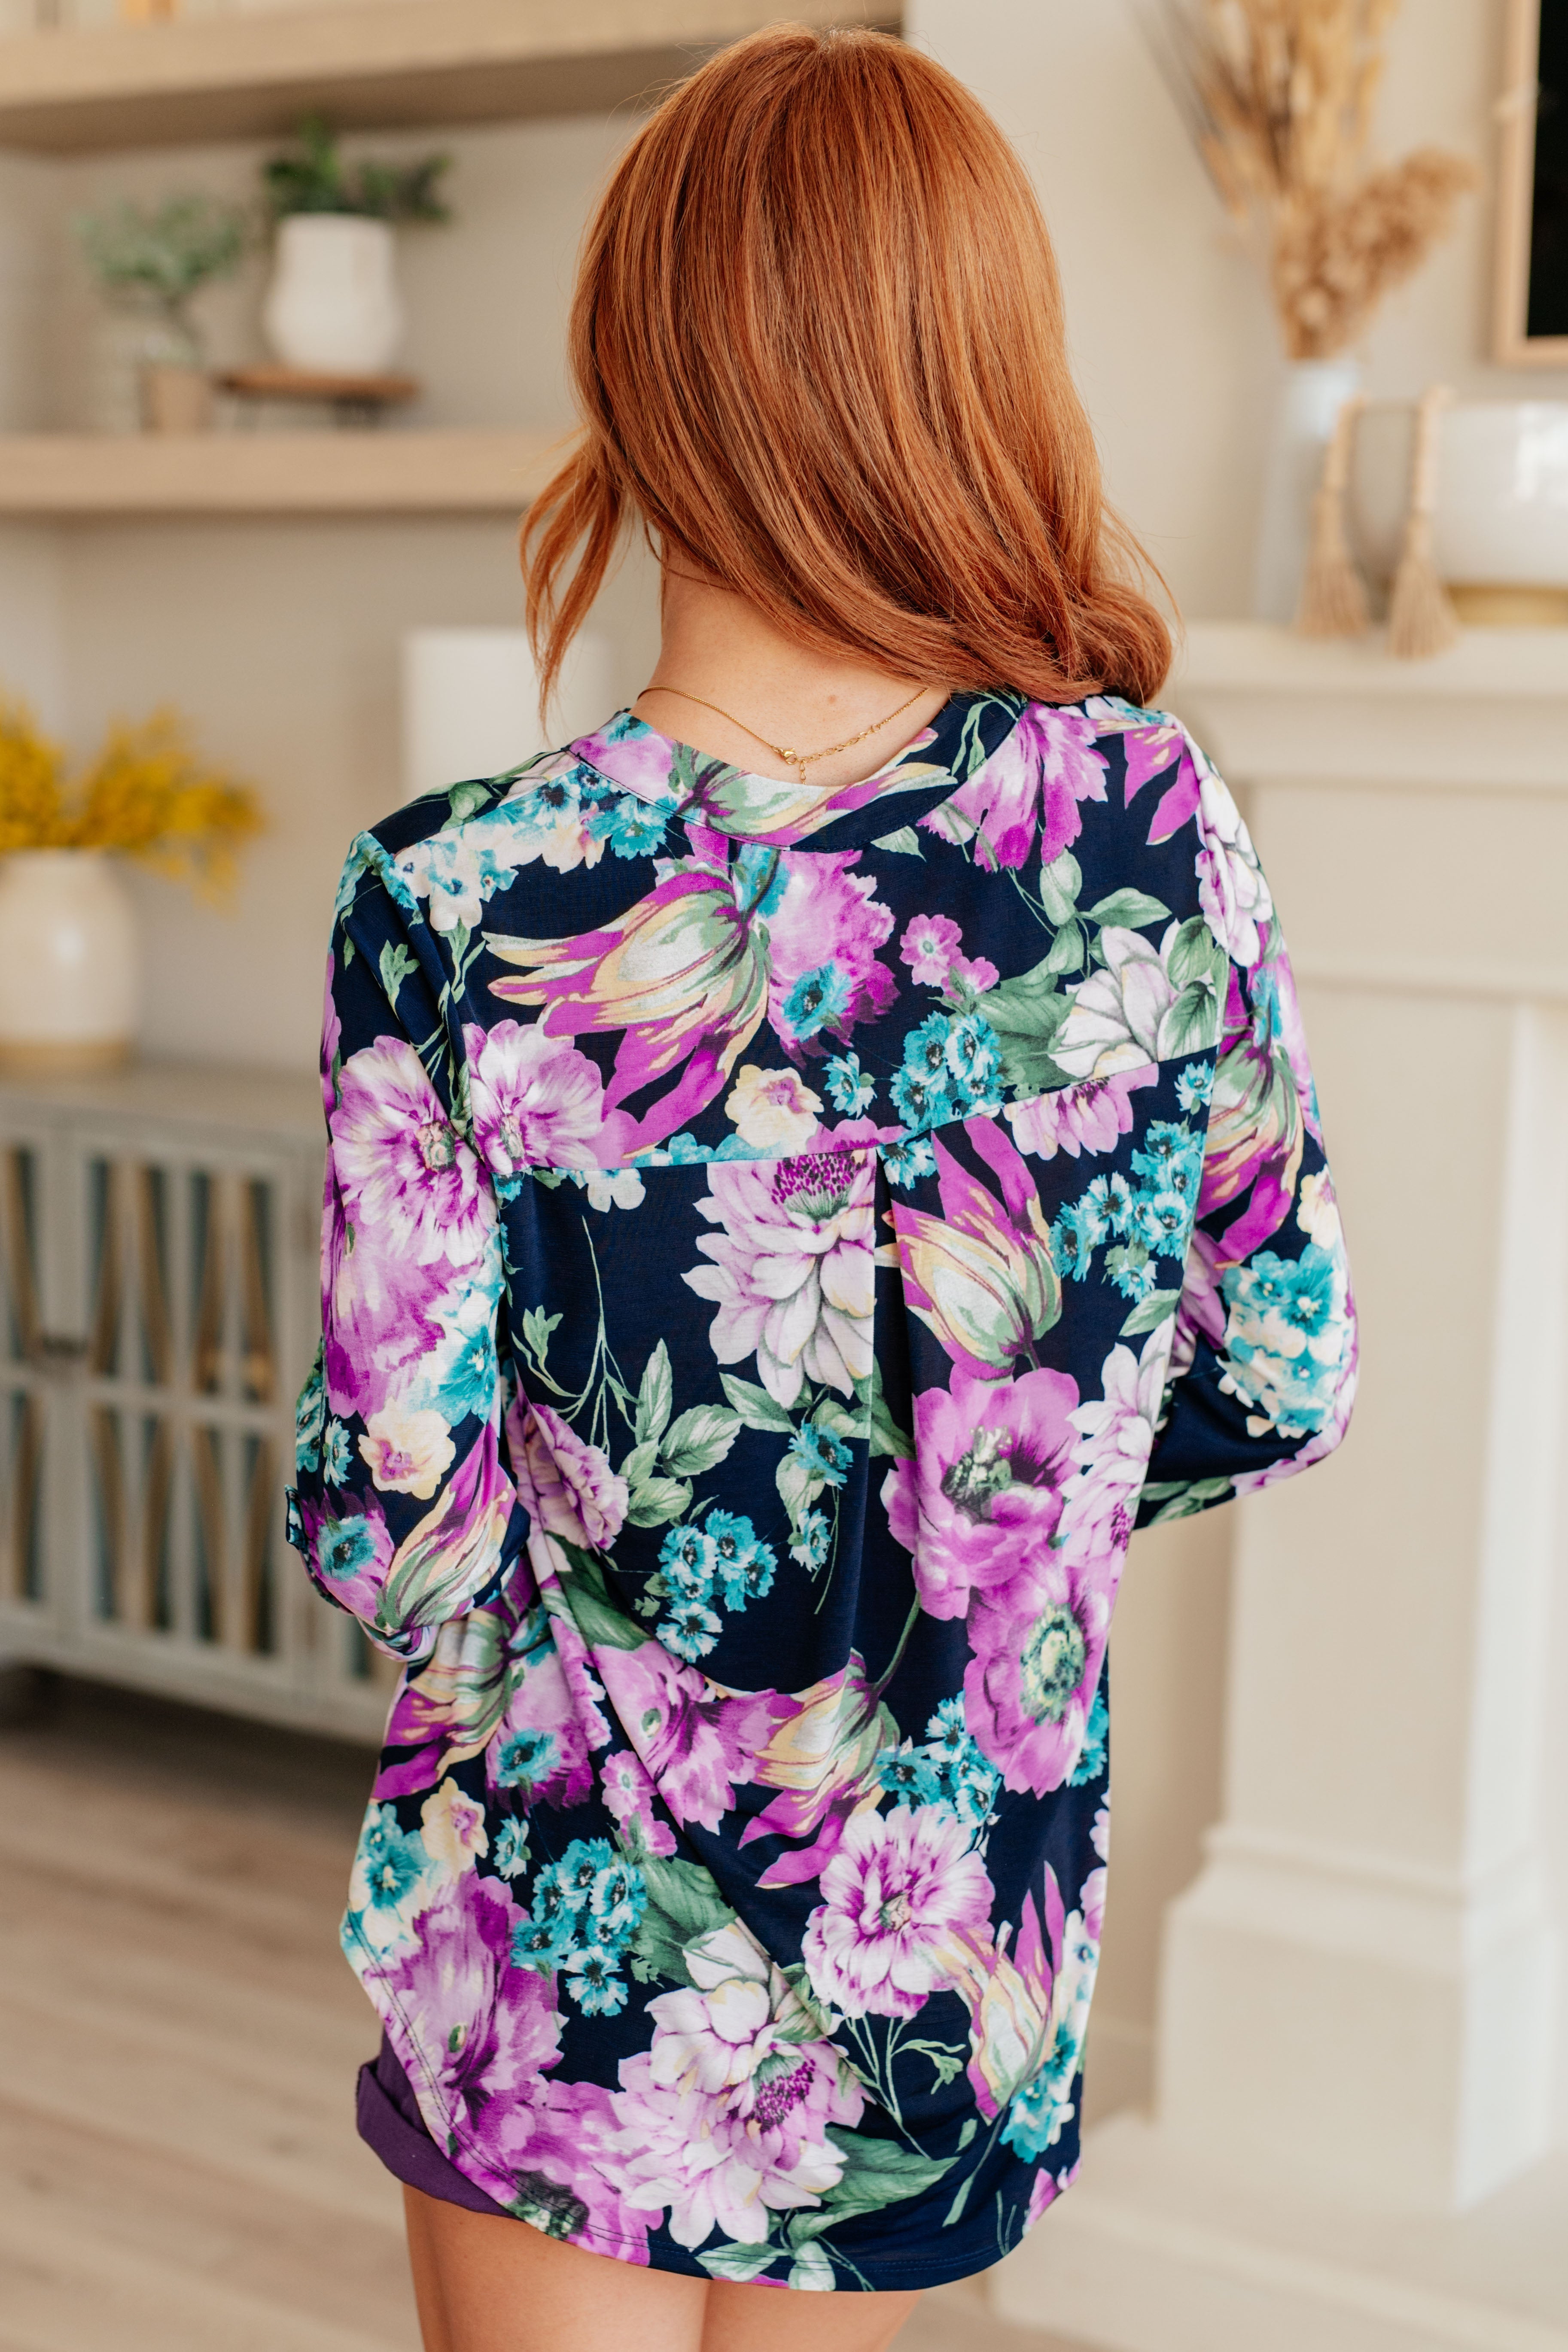 Lizzy Top in Navy and Purple Floral Tops Ave Shops   